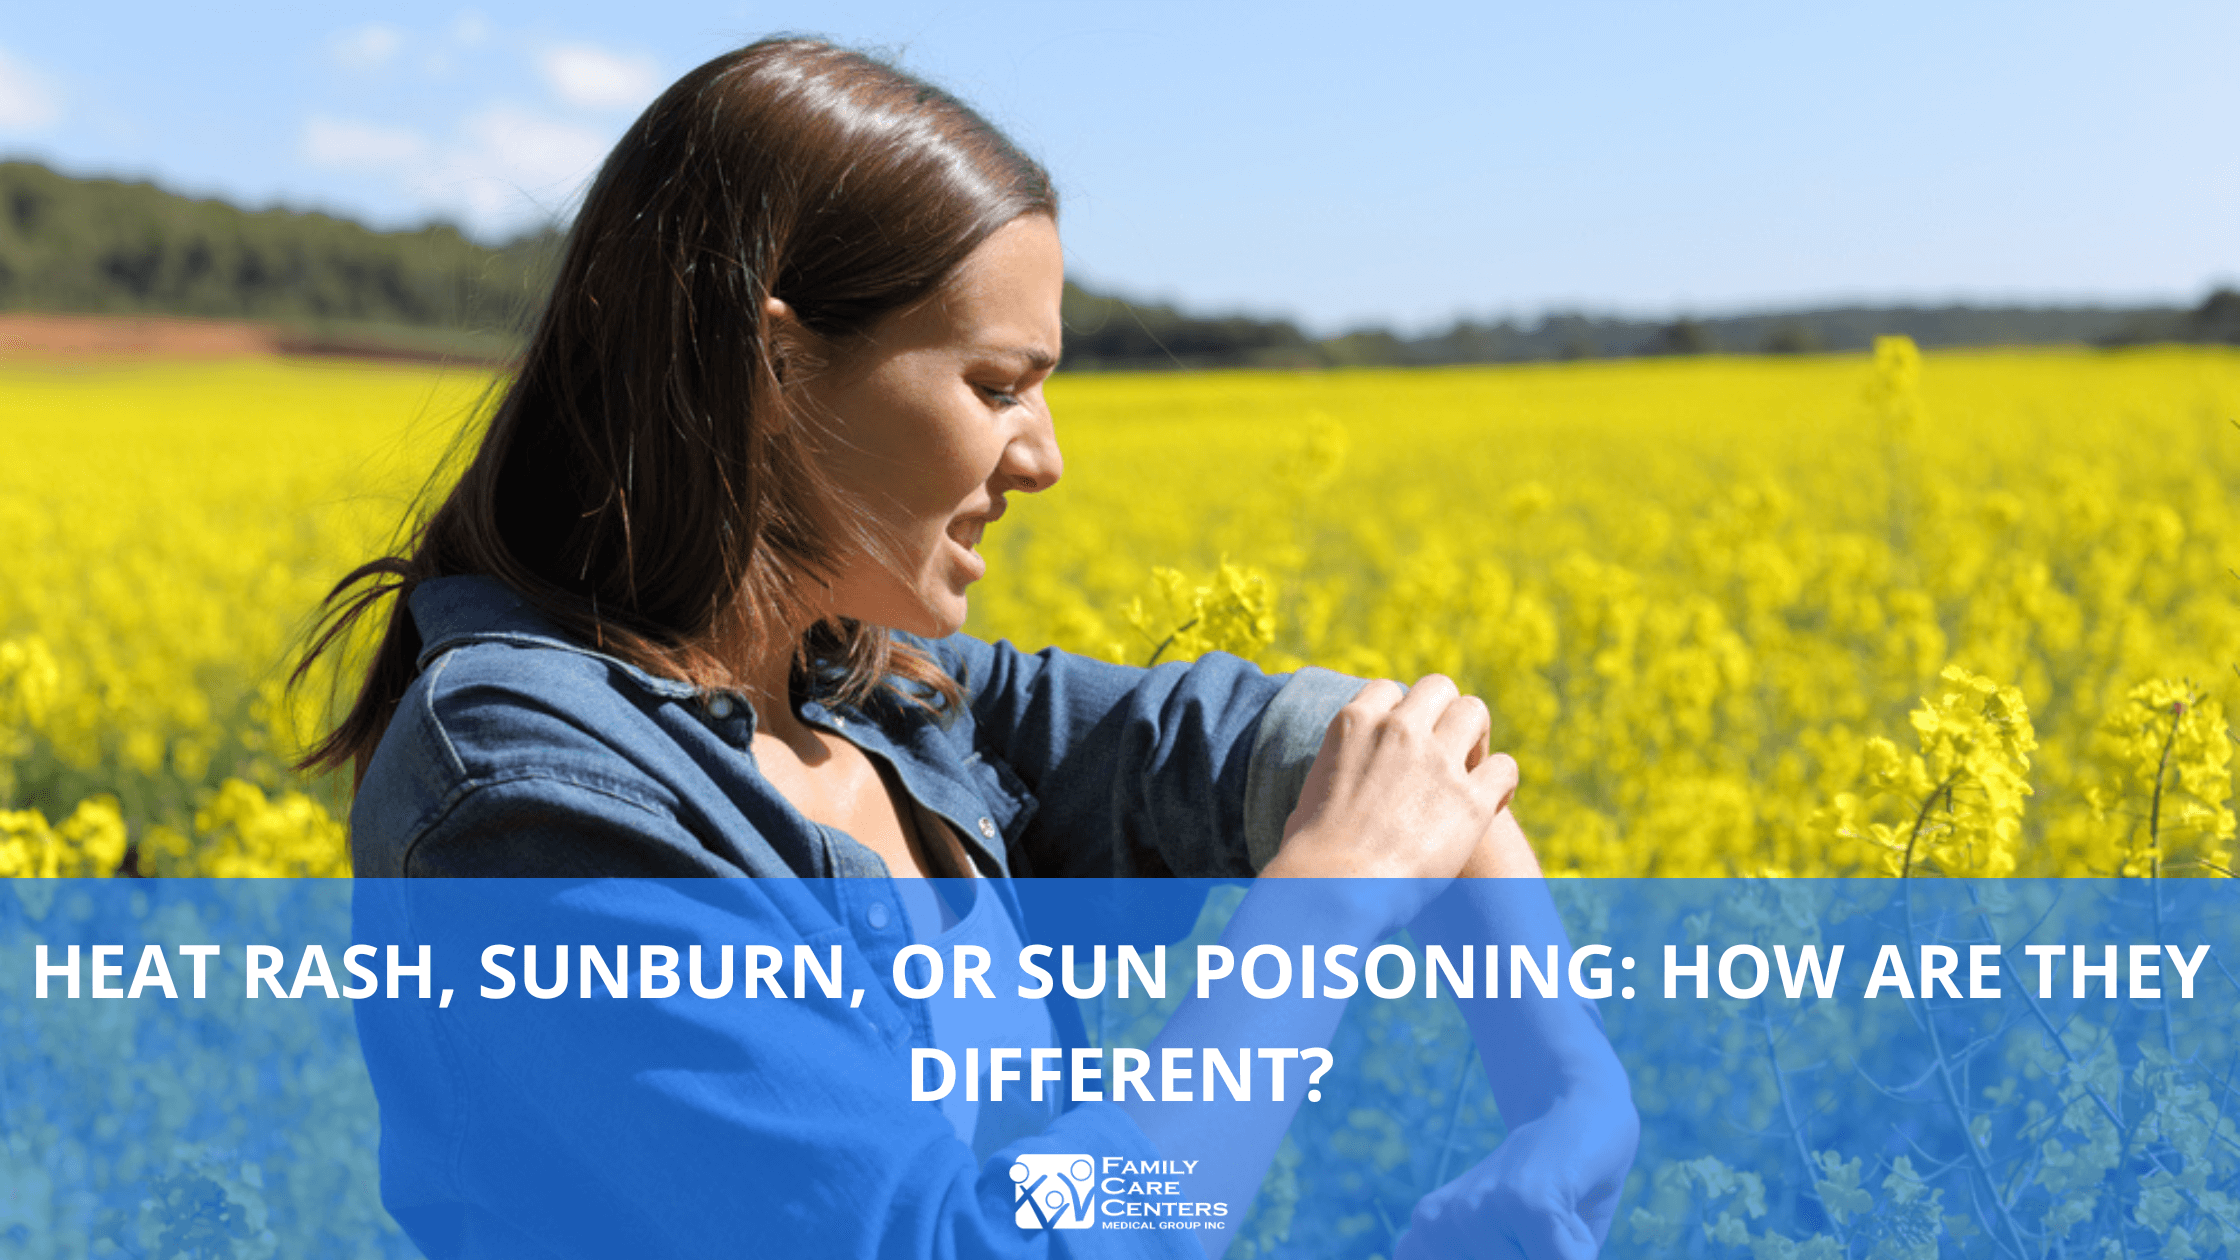 Heat Rash, Sunburn, or Sun Poisoning: How Are They Different?